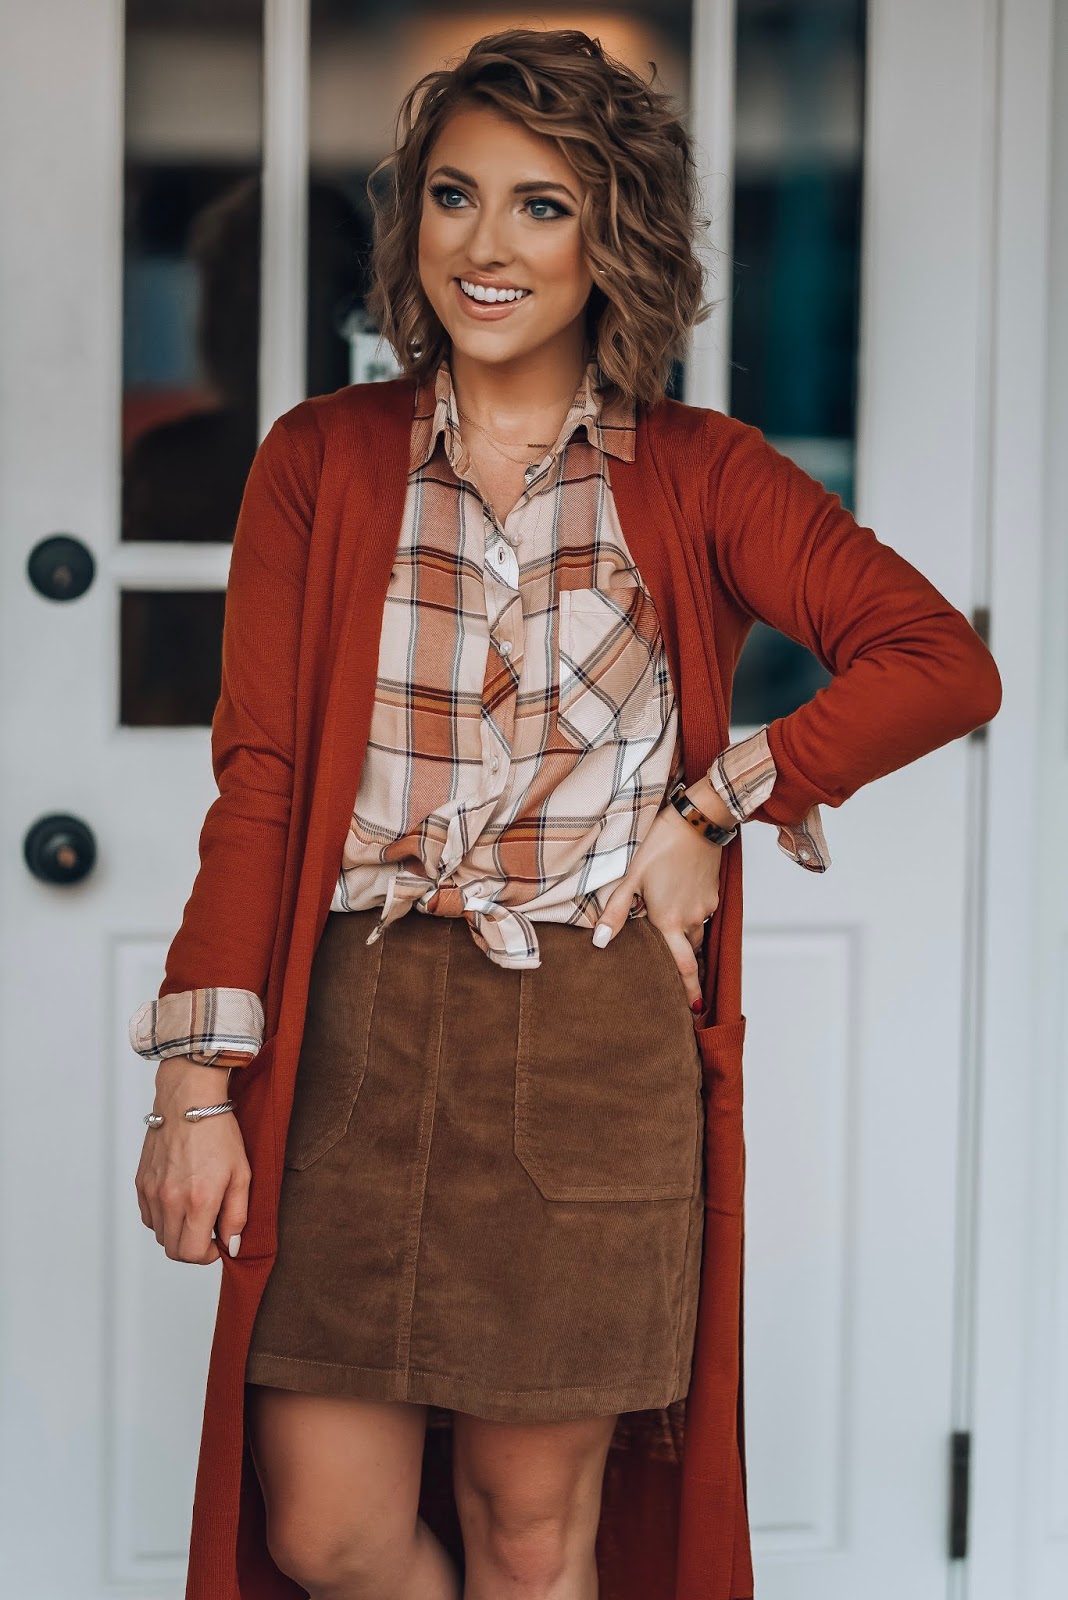 The Perfect Plaid Button Down With Longline Cardigan (both under $30) & Cord Skirt - Something Delightful Blog #fallstyle #targetstyle #fallfashion #affordablestyle